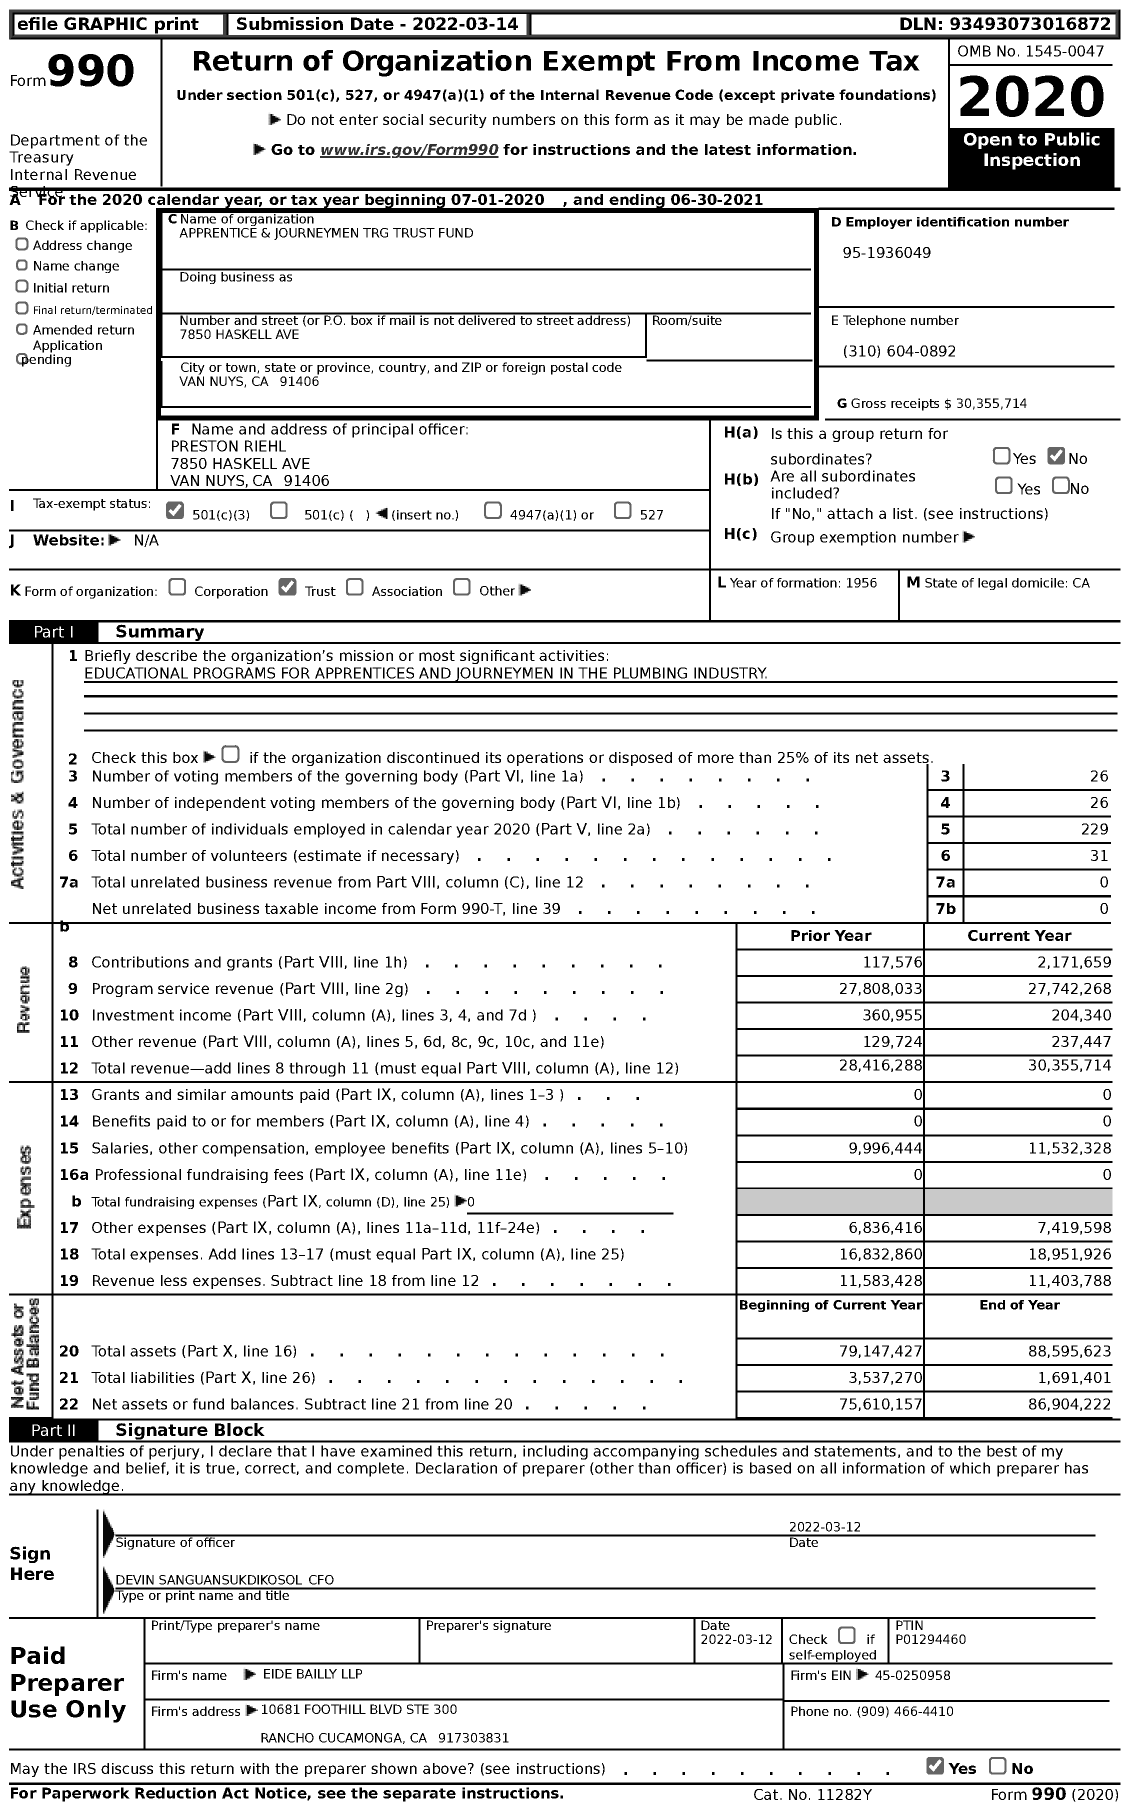 Image of first page of 2020 Form 990 for Apprentice & Journeyman TRG Trust Fund